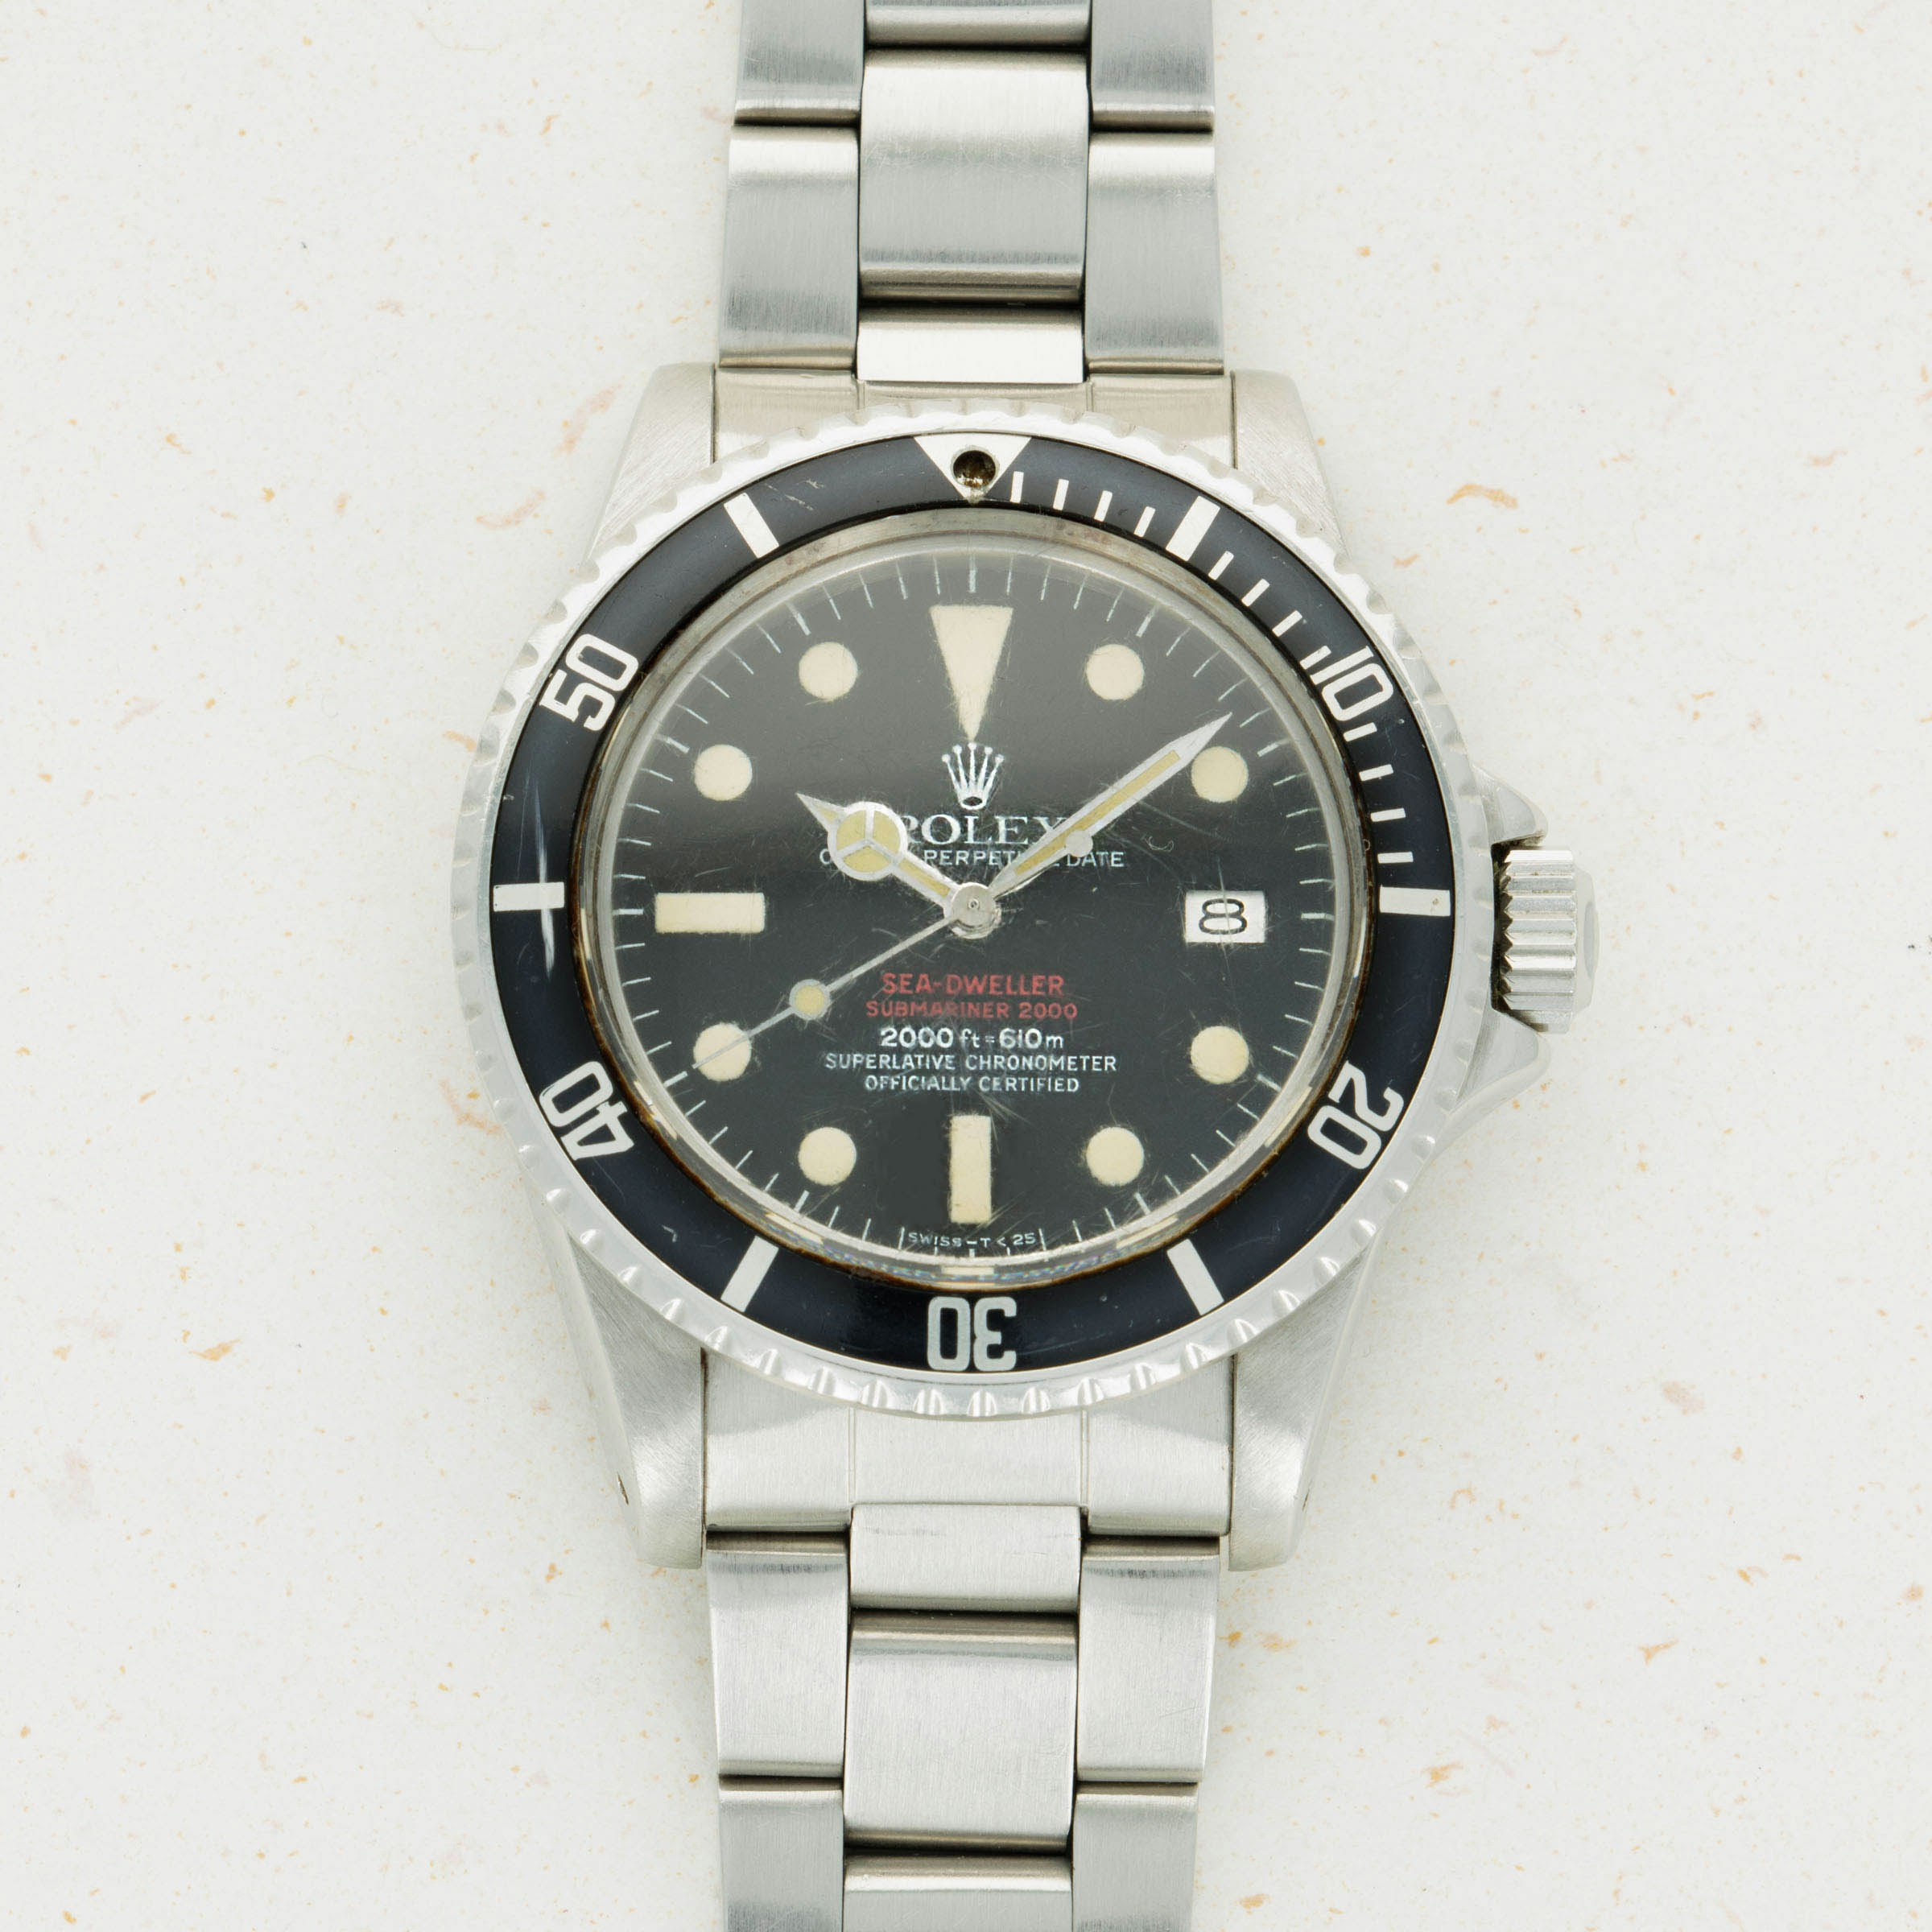 Thumbnail for Rolex Double Red Sea-Dweller 1665 MK4